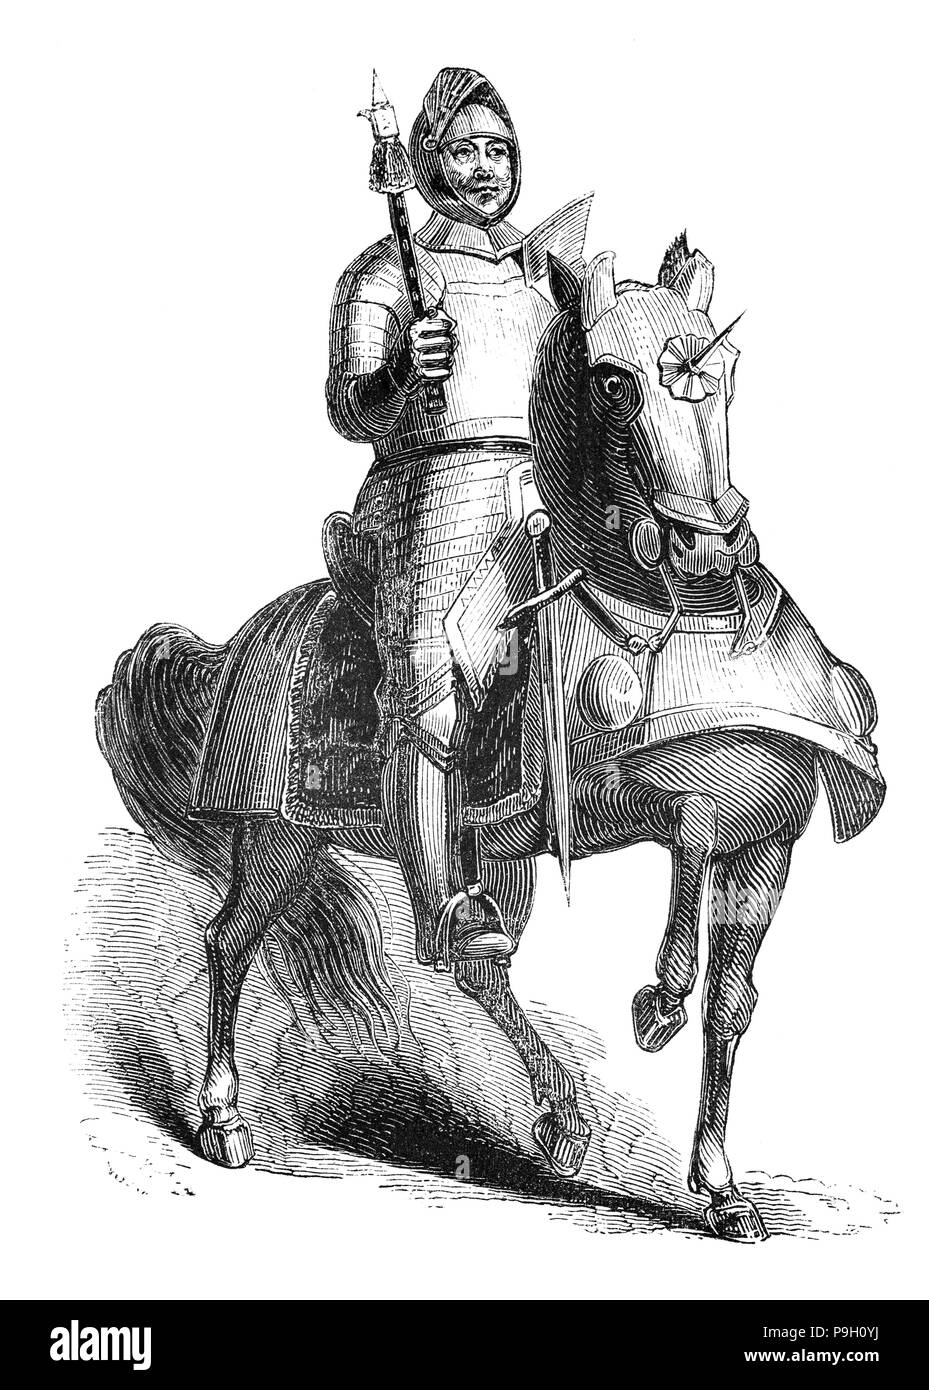 Henry VIII (1491 – 1547) on horseback and dressed in full body armour. He was King of England from 1509 until his death and the second Tudor monarch, succeeding his father, Henry VII. His early military campaigns began when he joined Pope Julius II's Holy League against France in 1511. Wolsey proved himself to be an outstanding minister in his organisation of the first French campaign and while the Scots saw this war as an opportunity to invade England, they were defeated at Flodden in 1513. However war with France ultimately proved expensive and unsuccessful Stock Photo